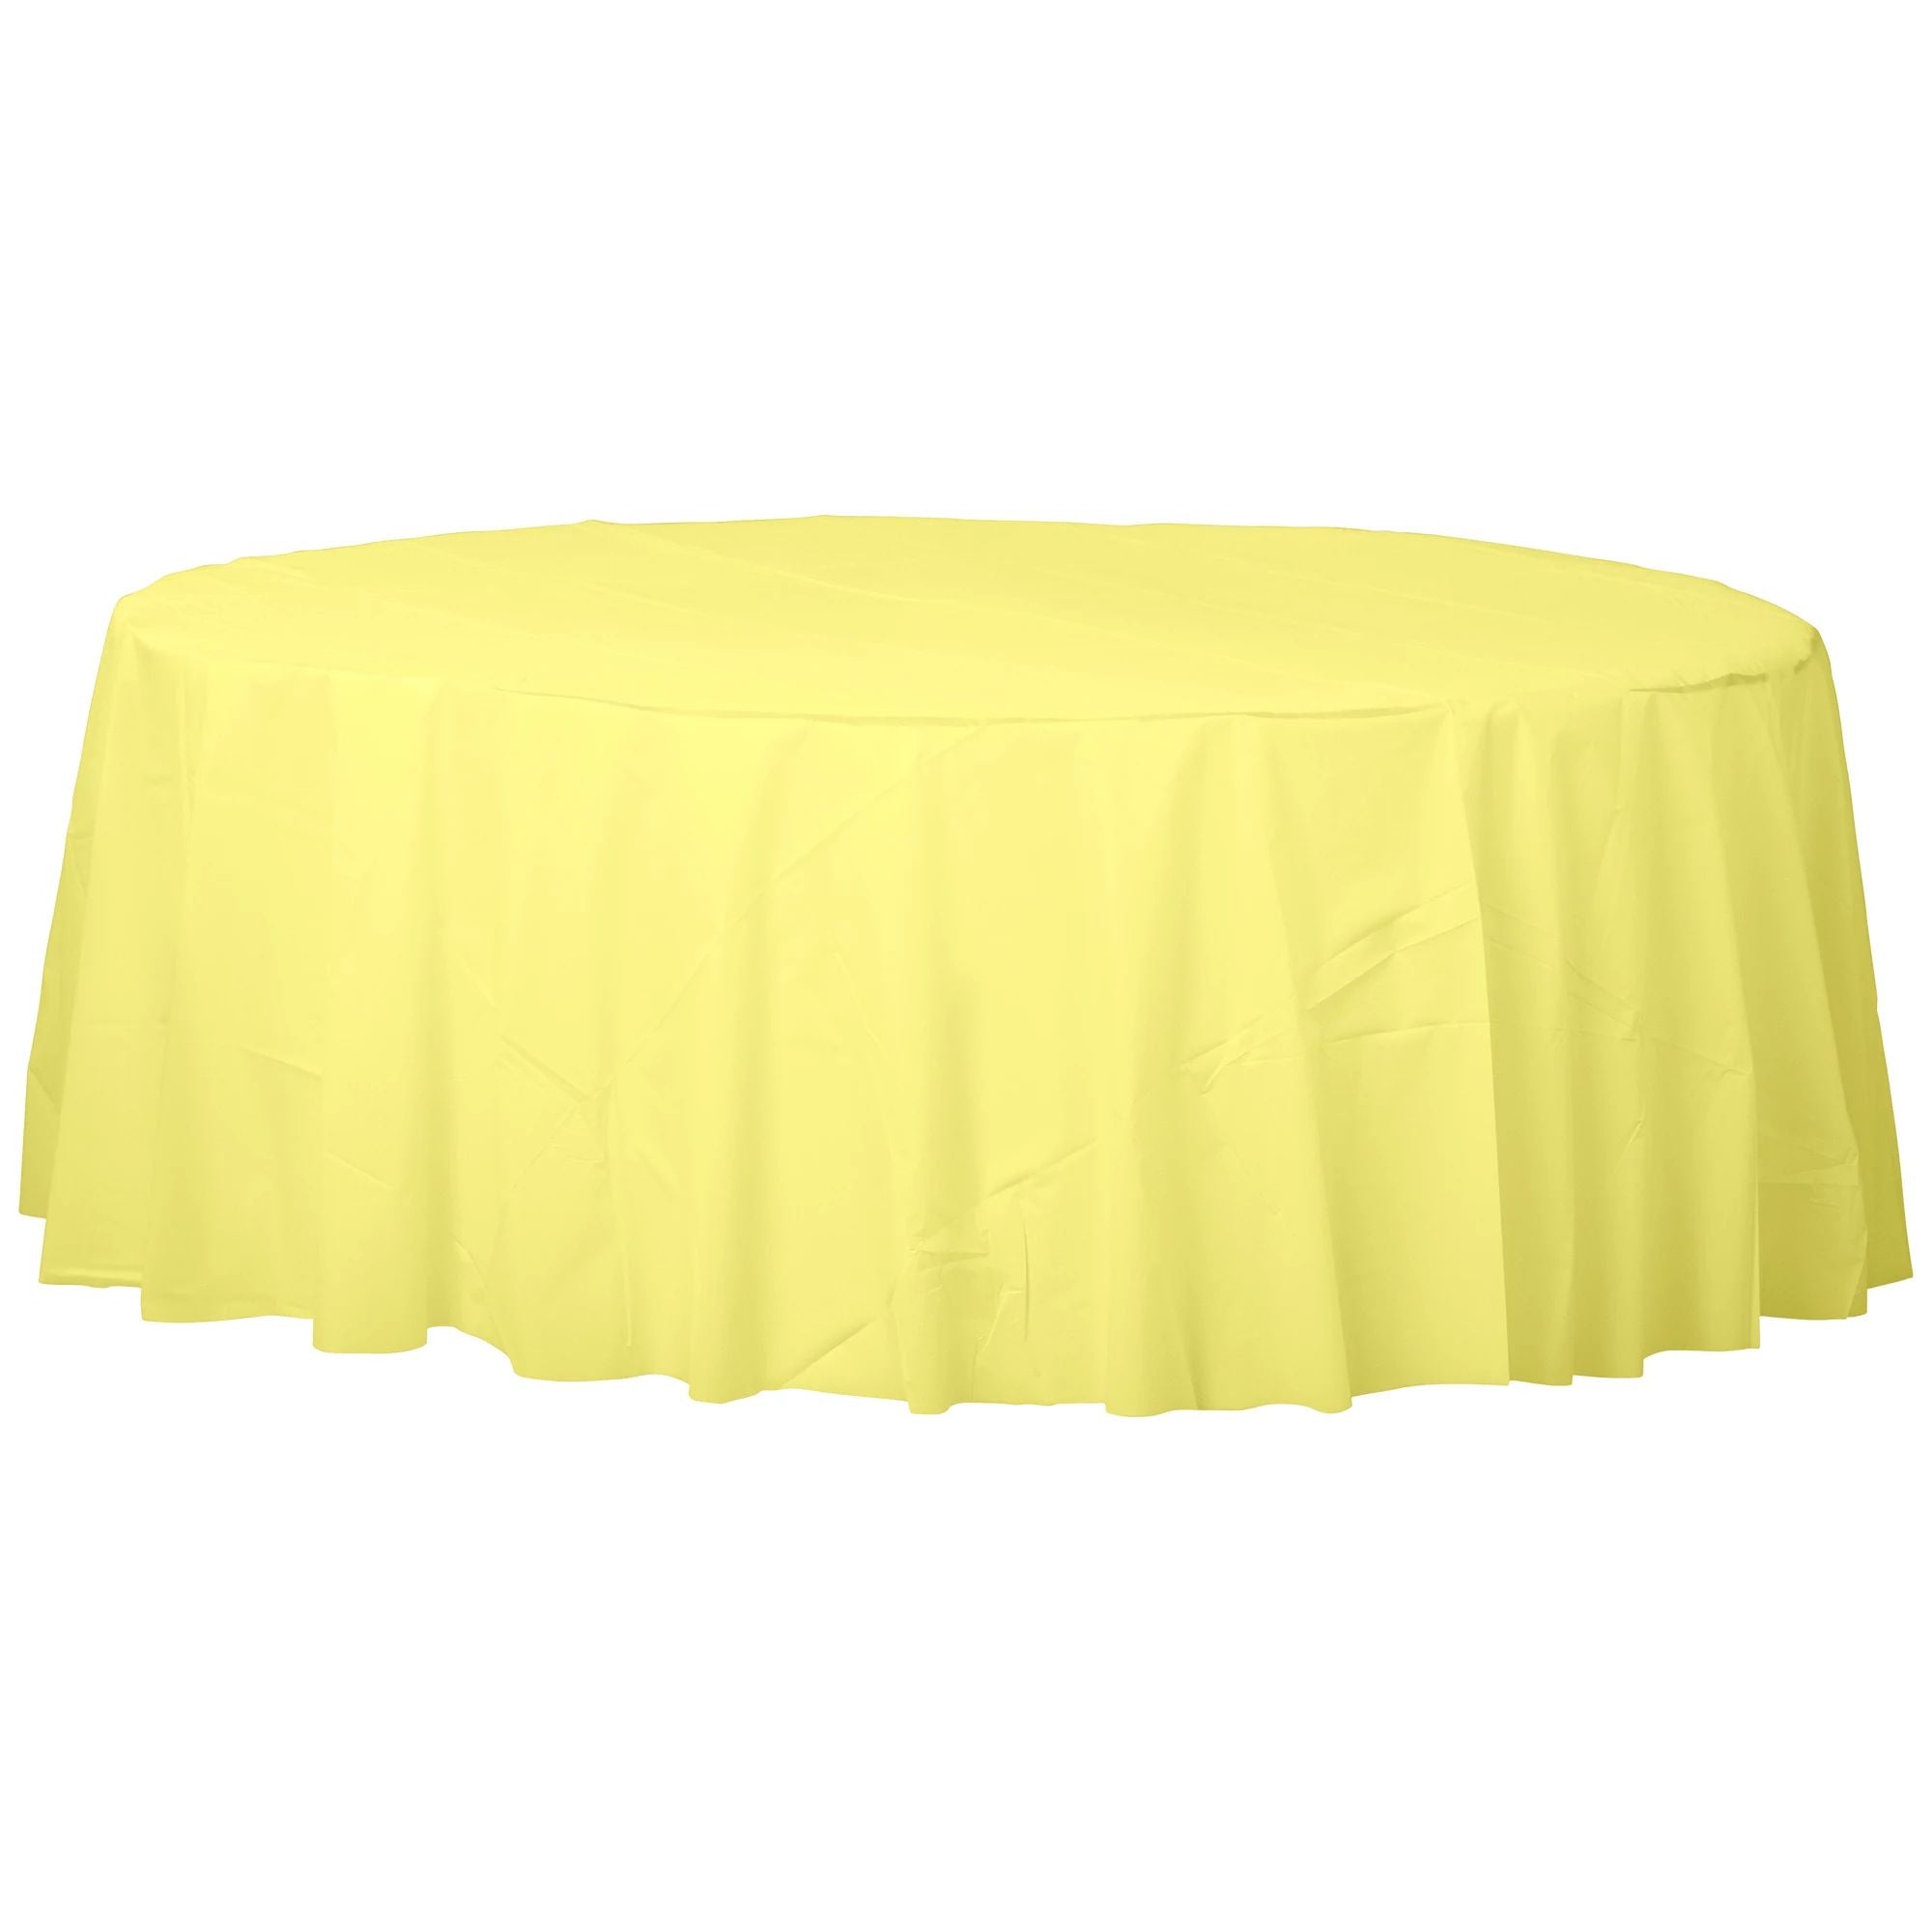 Round Plastic Table Cover - Light Yellow 
84" 